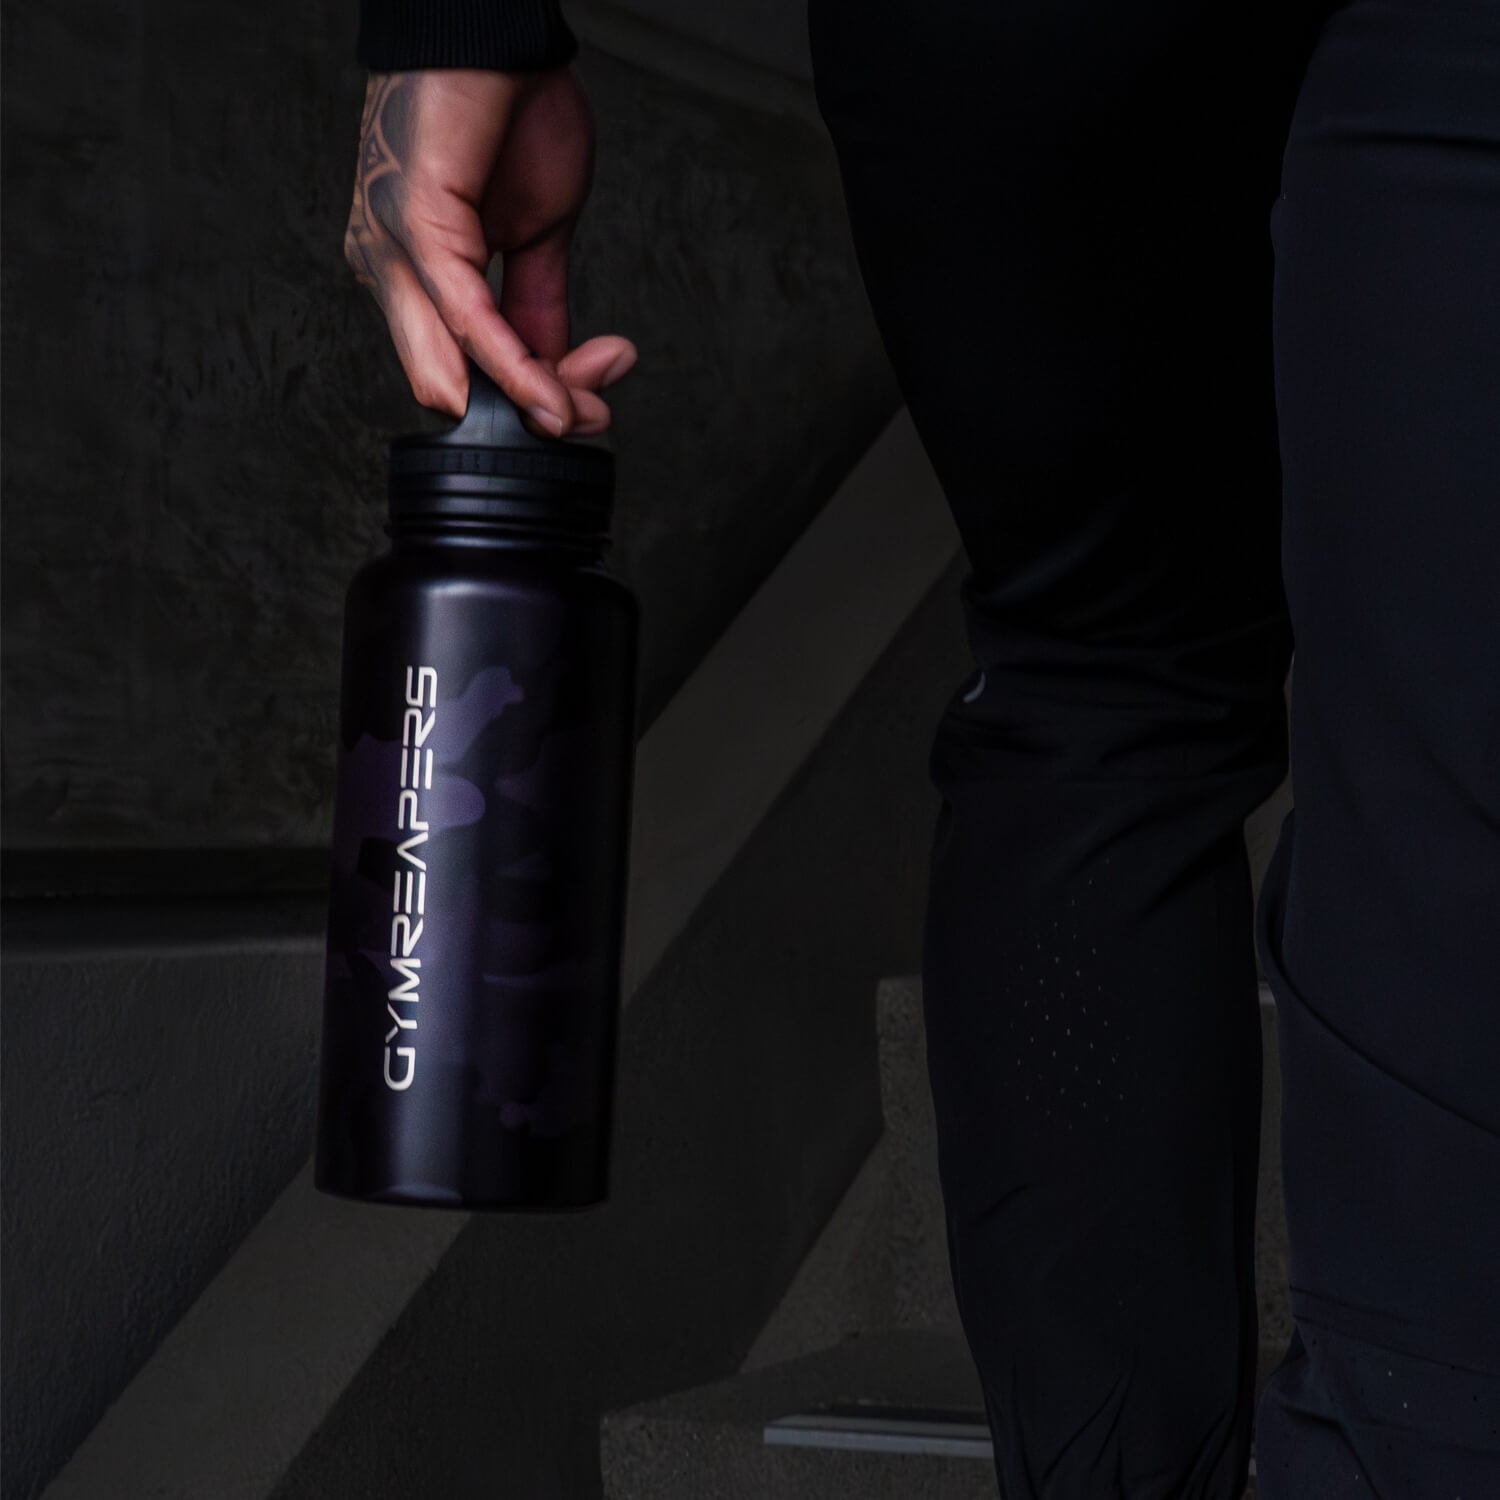 Gymreapers Insulated Water Bottle - Stainless Steel 32 oz, 3 Lids (Straw, Chug, Canteen), Double Walled Vacuum Insulation, Thermo Mug Cold Hot 